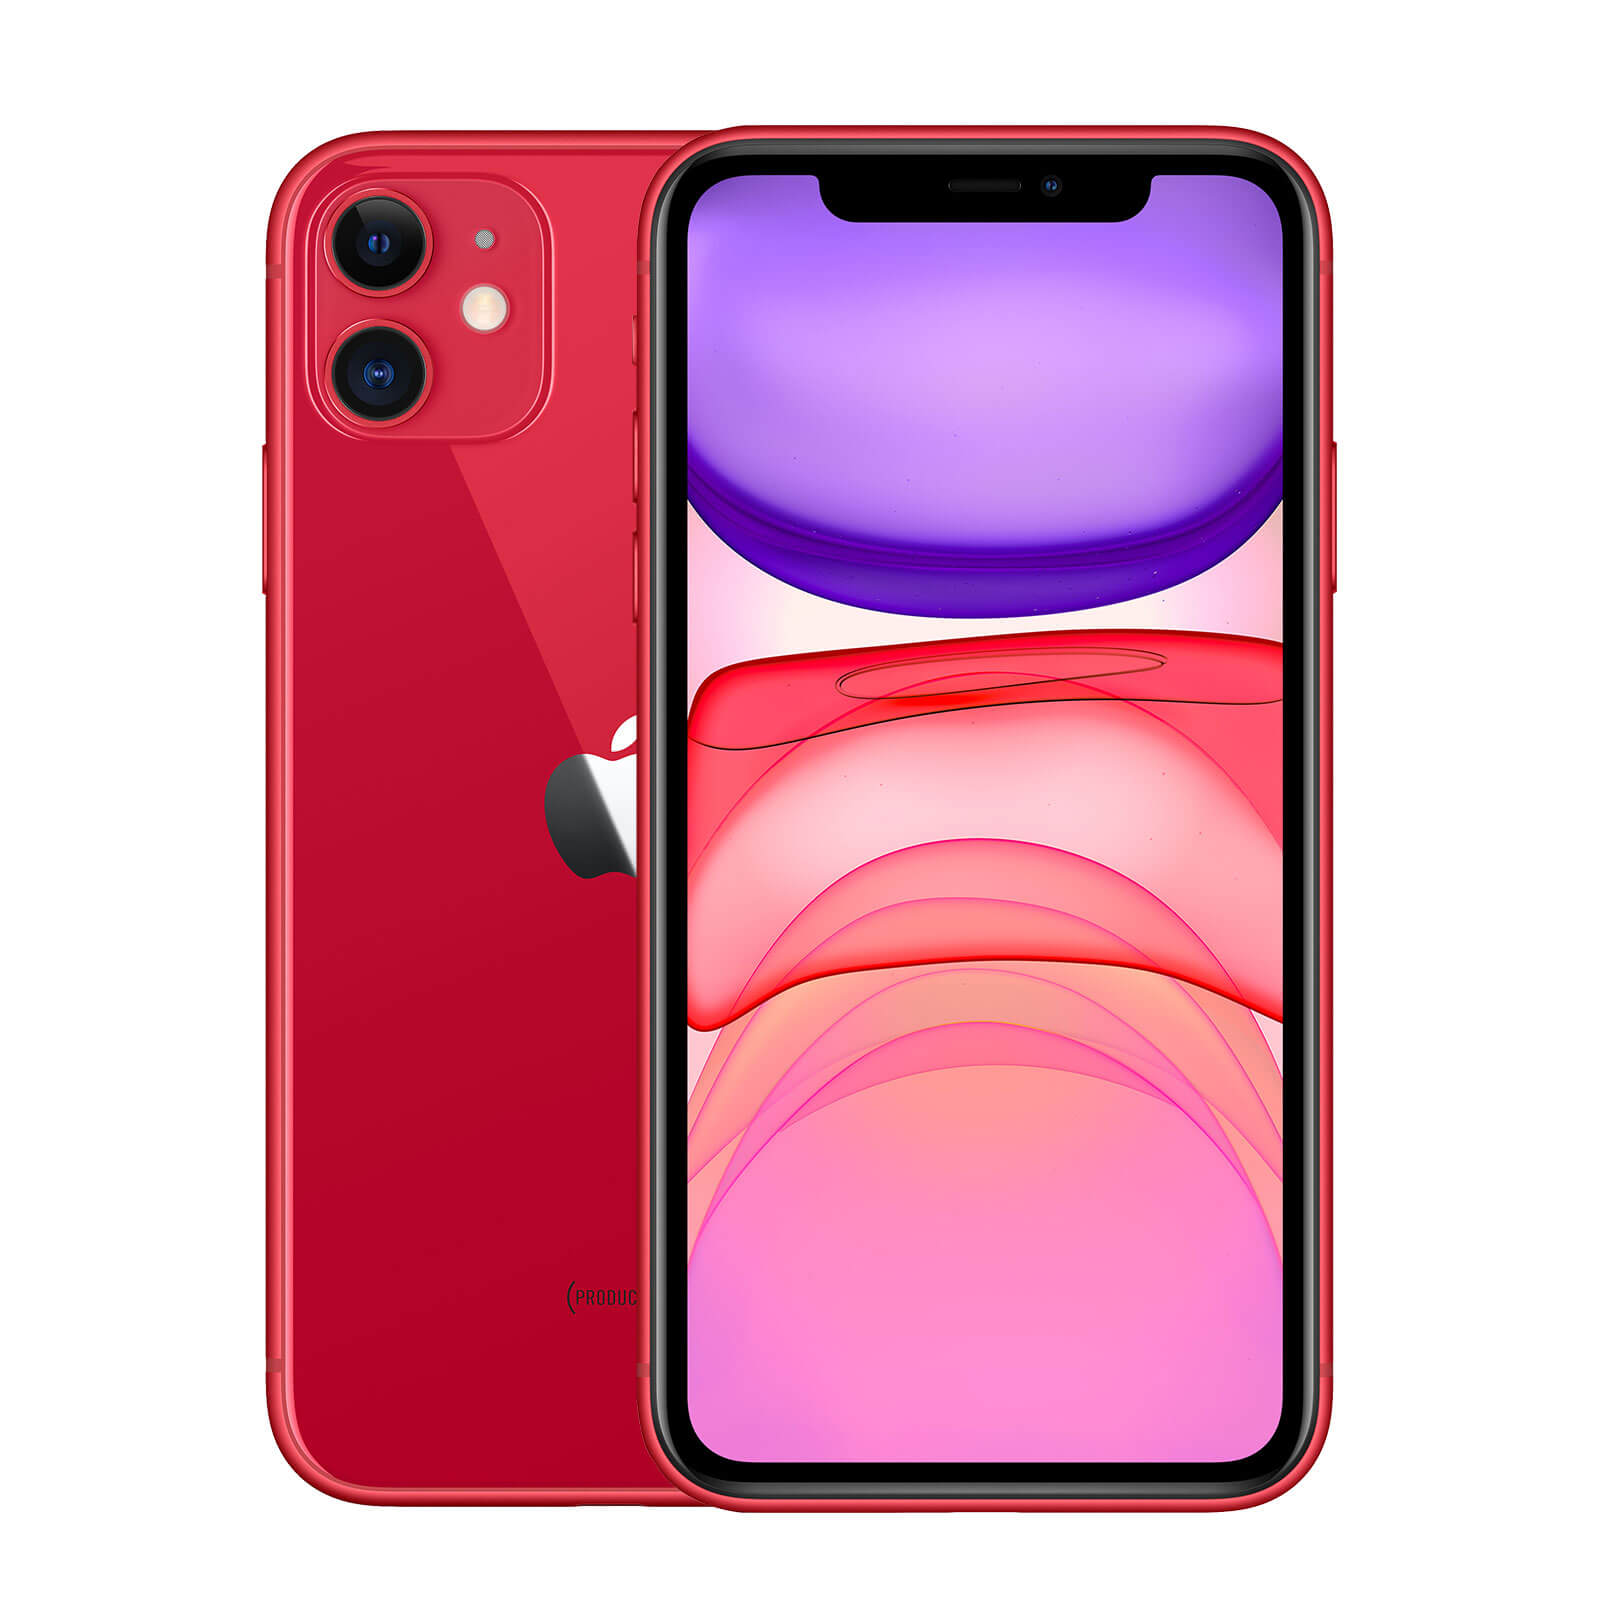 Apple iPhone 11 256GB Product Red Good - T-Mobile